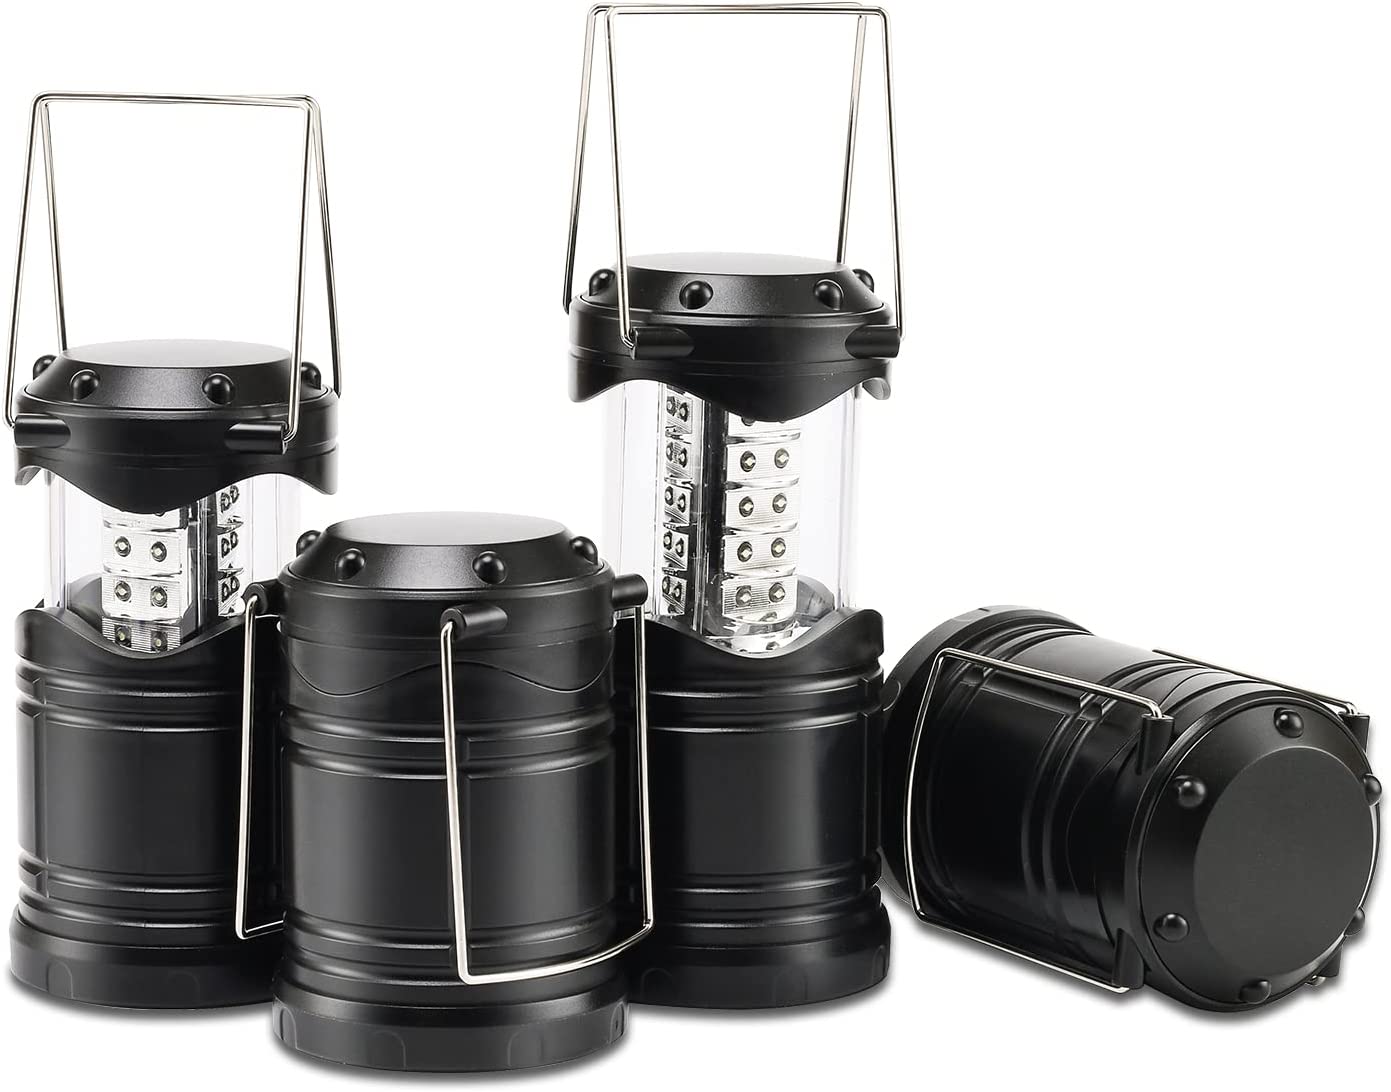 Lichamp 4 Pack LED Camping Lanterns, Battery Powered Camping Lights LED Super Bright Collapsible Flashlight Portable Emergency Supplies Kit, A4BK